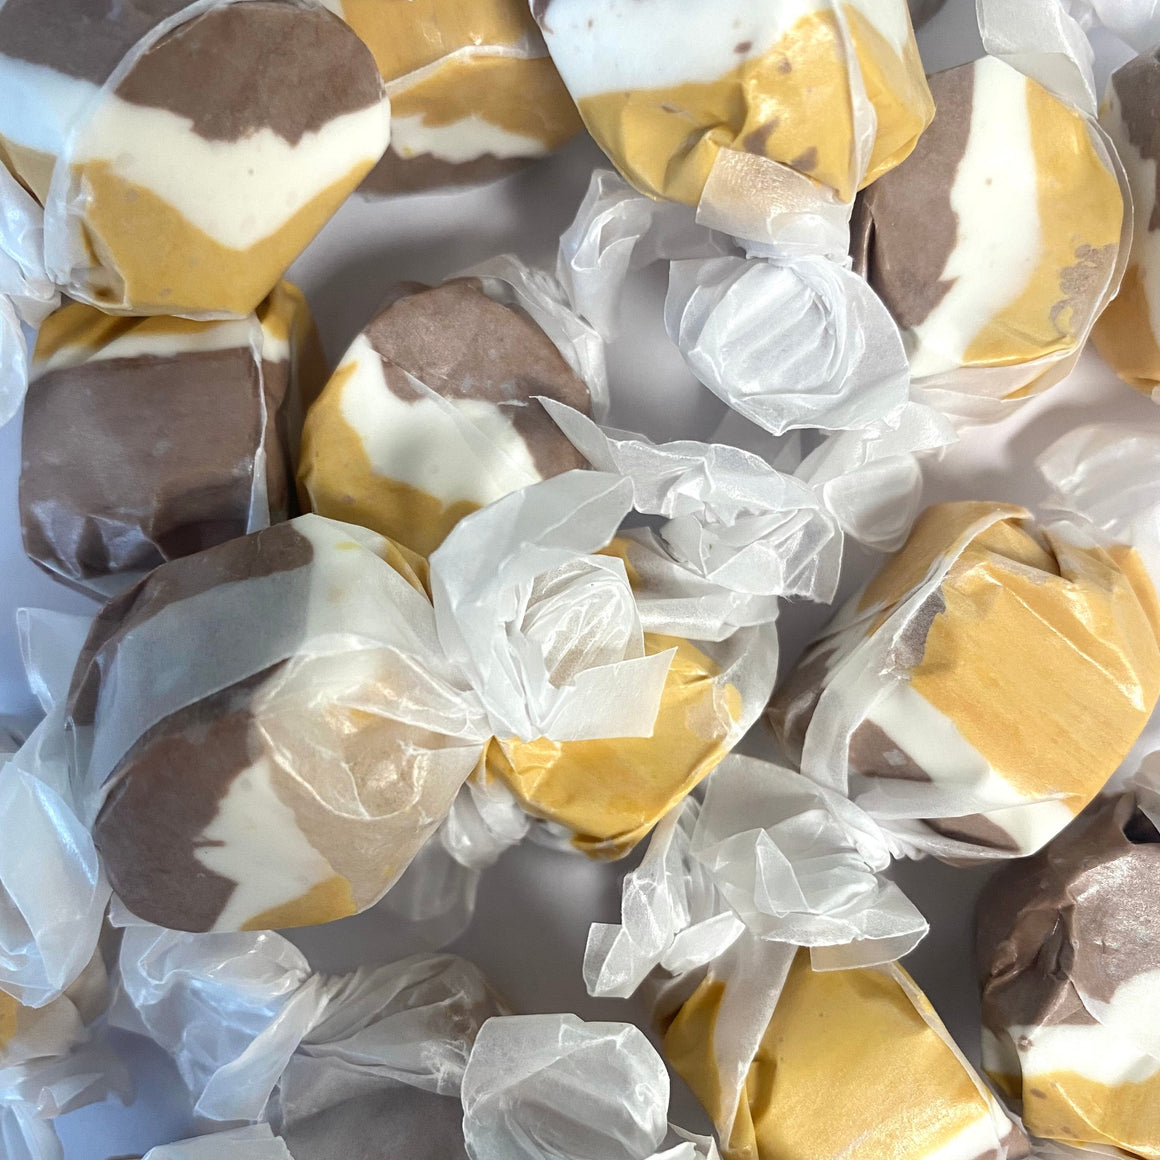 S'mores Salt Water Taffy. For fresh candy and great service, visit www.allcitycandy.com